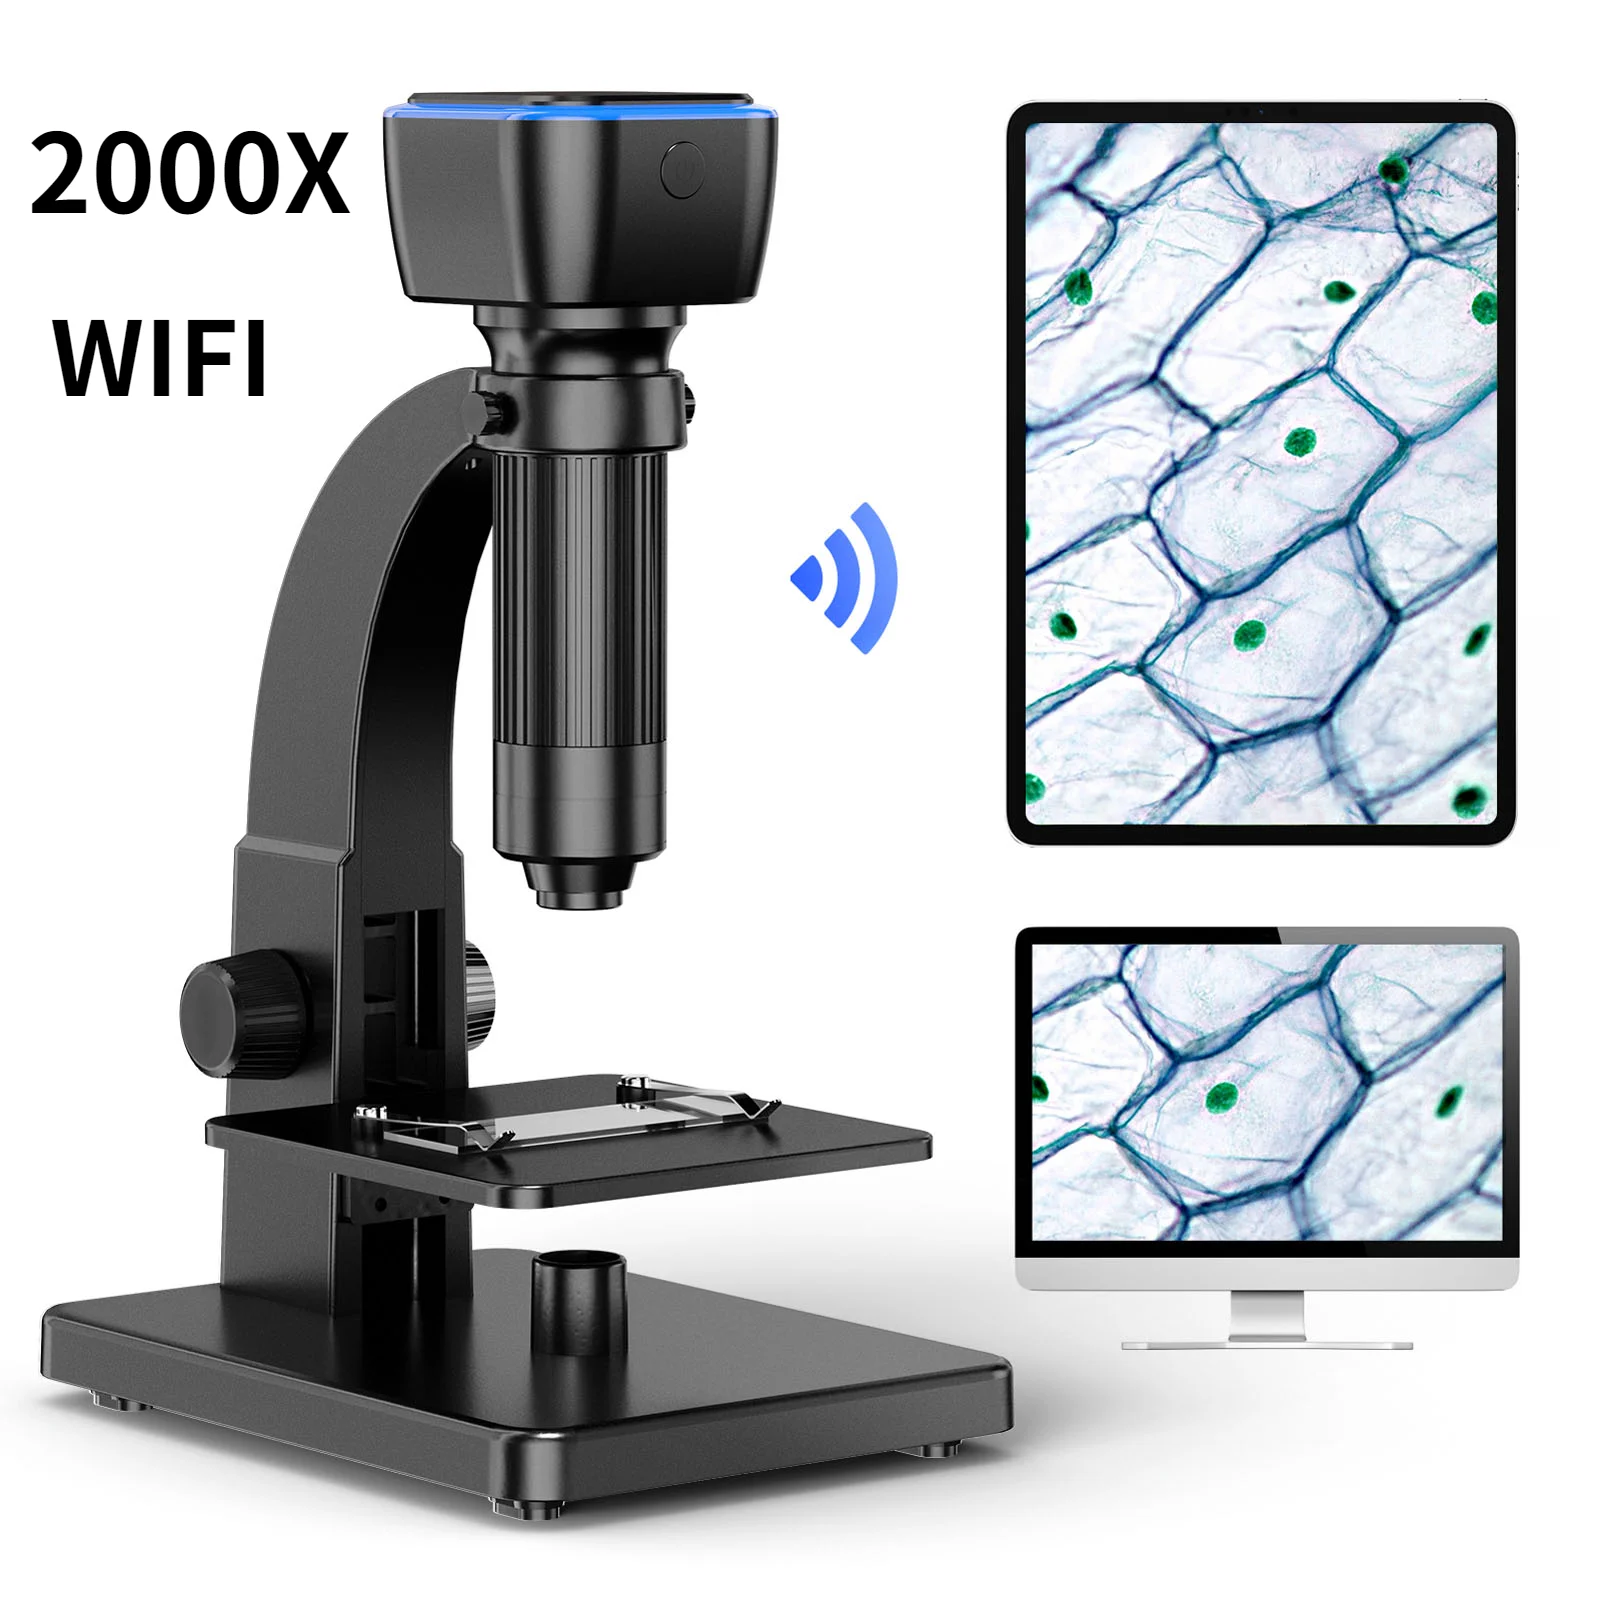 2000X Wifi Digital Microscope For Soldering Microscope Camera 5.0M Pixel Dual LED Lights Dual Lens Magnifier for Electronics PCB